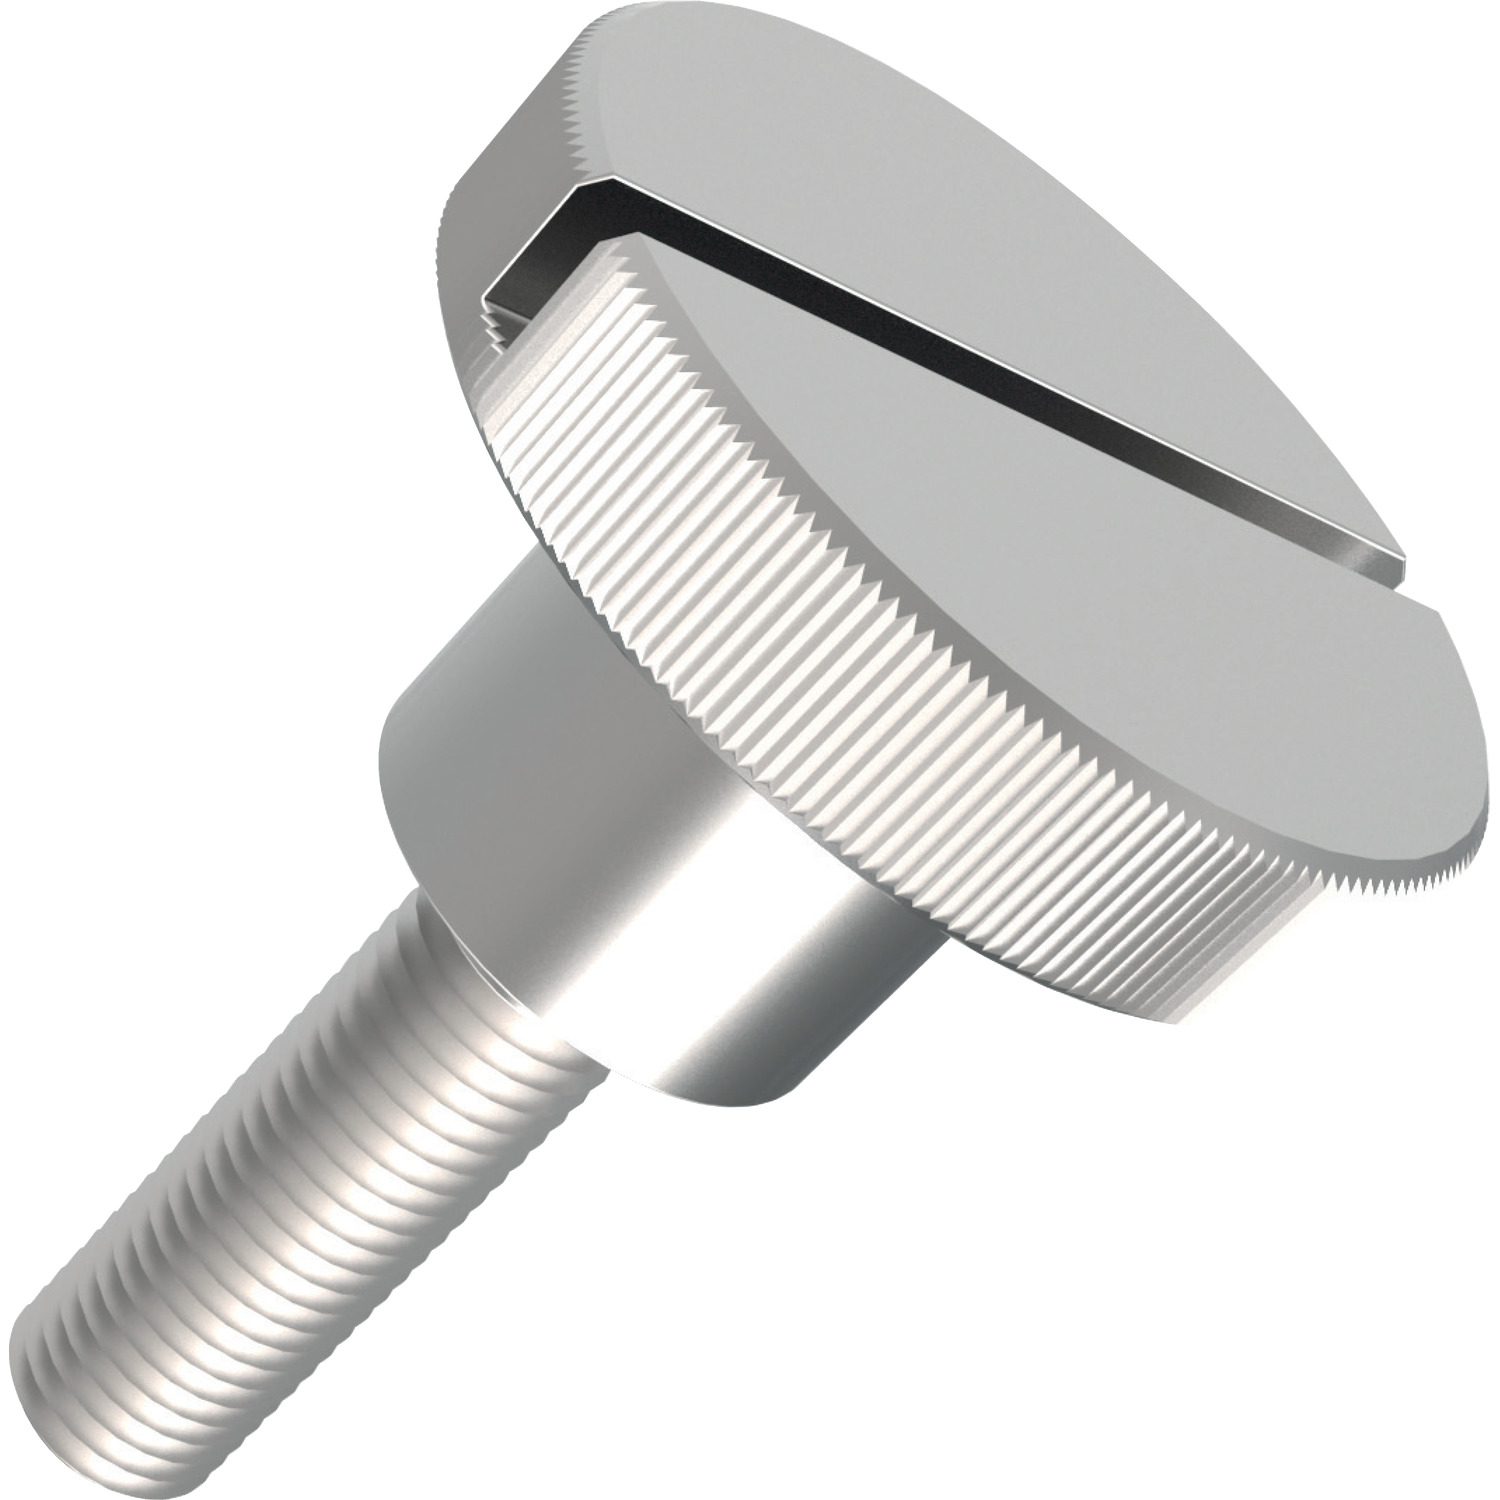 P0404 - Knurled Thumb Screws with slot